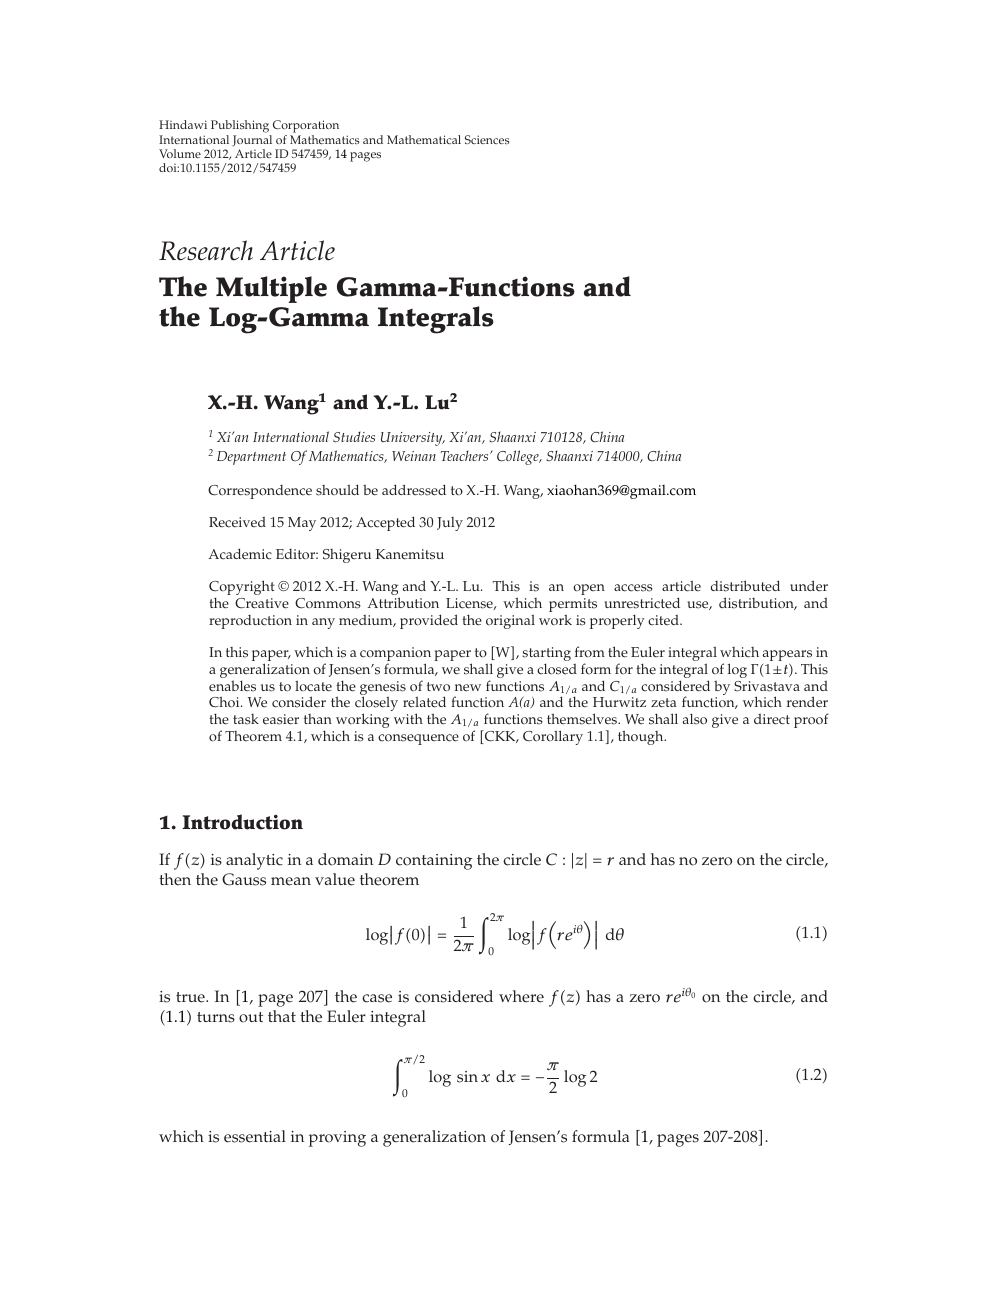 The Multiple Gamma Functions And The Log Gamma Integrals Topic Of Research Paper In Mathematics Download Scholarly Article Pdf And Read For Free On Cyberleninka Open Science Hub